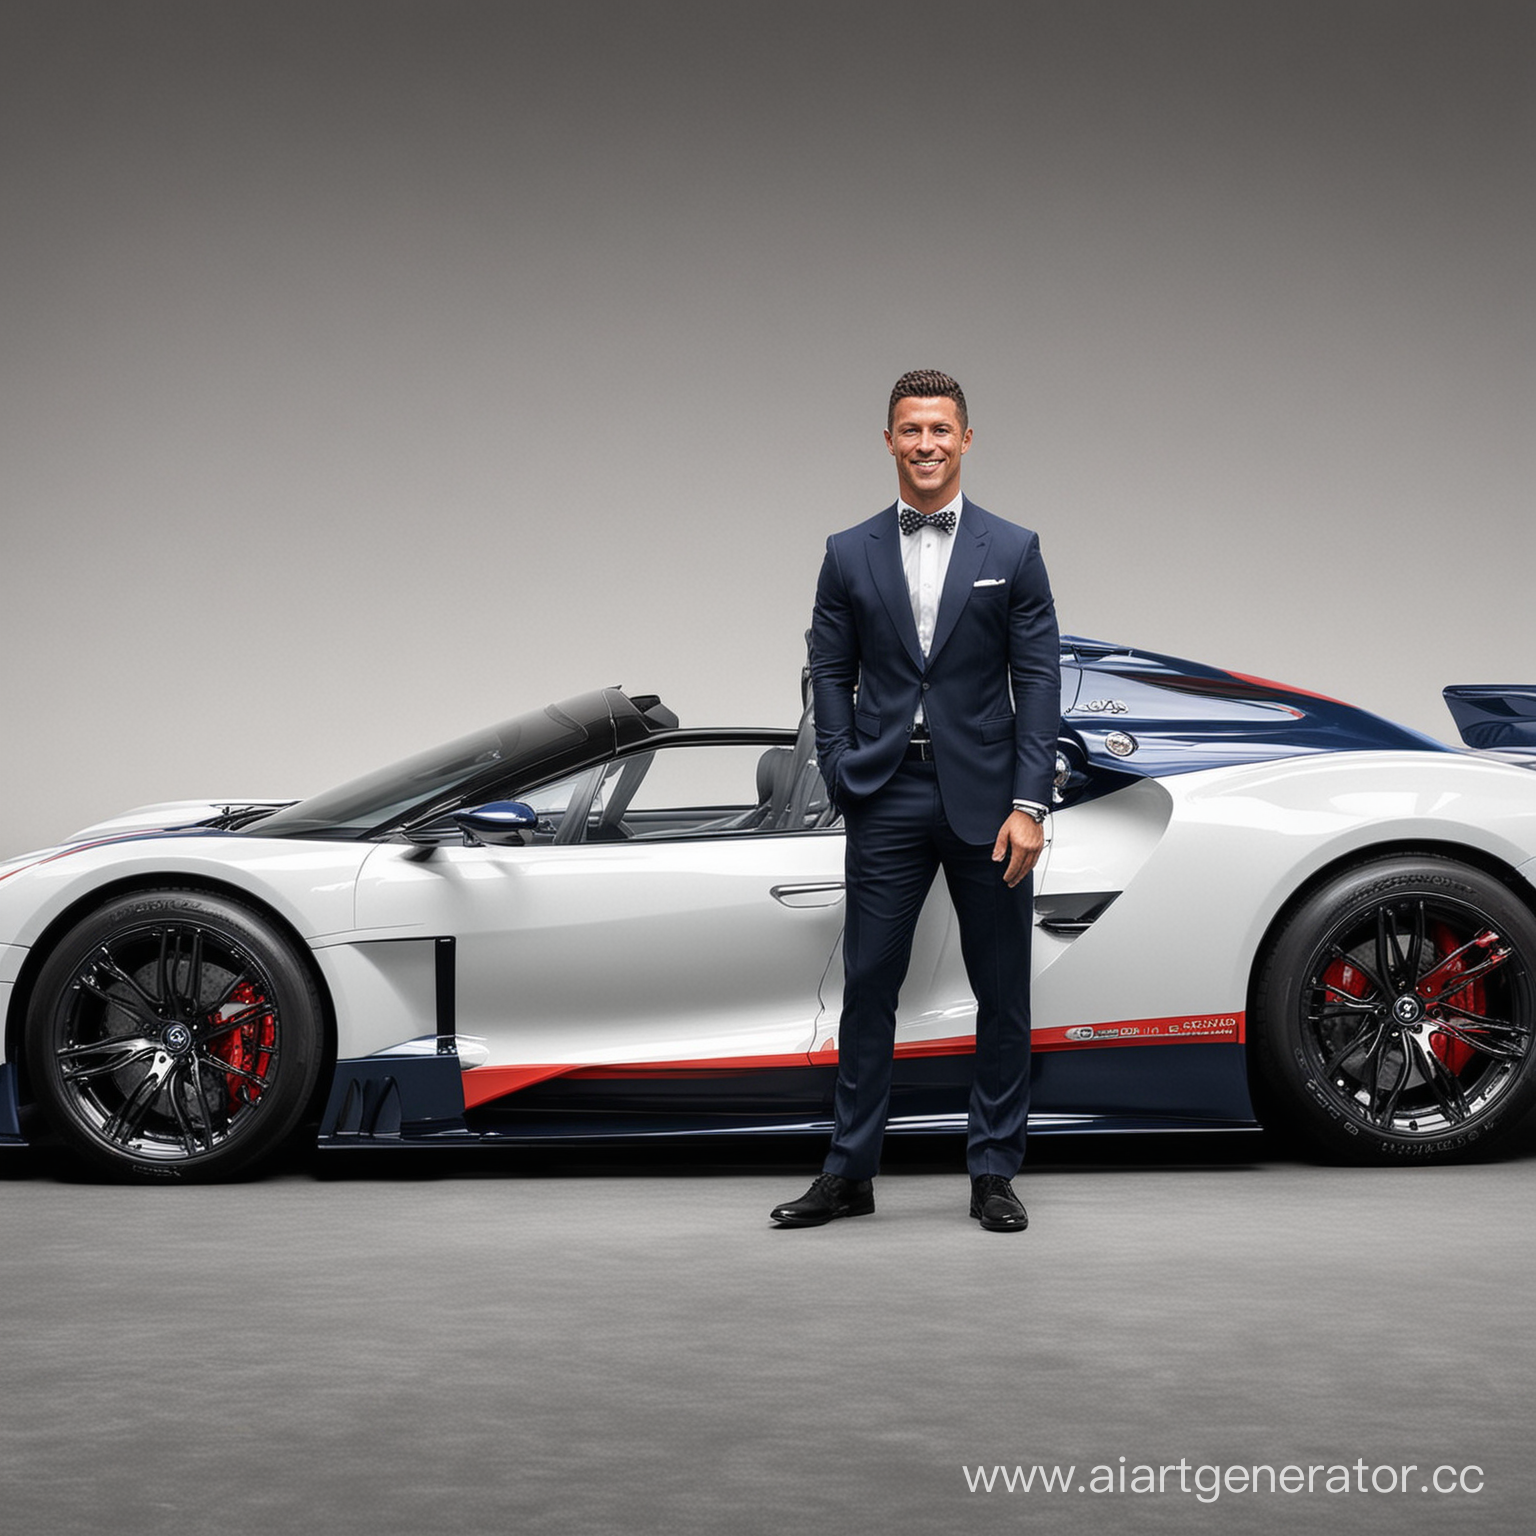 Cristiano Ronaldo, the Portuguese soccer star, shows his love for the Bugatti Centodieci model. There are only 10 copies of this car in the world, and Ronaldo, with his patriotism, repainted it in the colors of Portugal. Learn the story of his $14 million Bugatti 110th anniversary celebration 1. Ronaldo is showing his patriotism by repainting the car in Portuguese colors to show off his enthusiasm. This is a celebration of the 110th anniversary of the Bugatti brand. 🇵🇹🚗

The Bugatti Centodieci model was produced in celebration of the 110th anniversary of the Bugatti brand. There are only 10 copies of this car in the world, each of which costs more than $14 million. Ronaldo is famous for repainting this car in Portuguese colors to show his enthusiasm. He chose this car very well to show his patriotism. 🇵🇹🚗